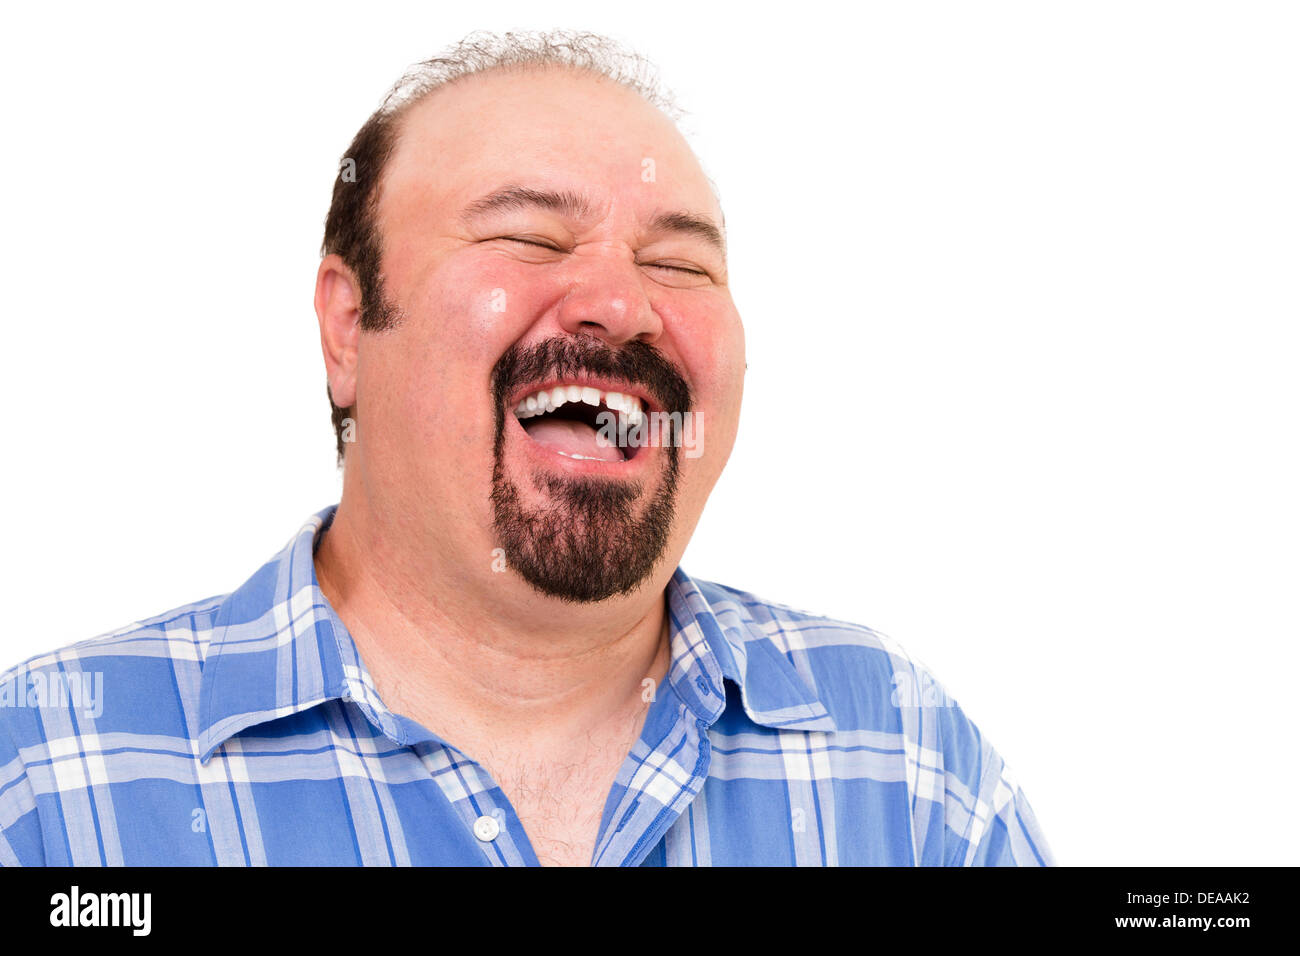 Big man having a hearty laugh of enjoyment and merriment with his head thrown back and eyes closed, isolated on white Stock Photo